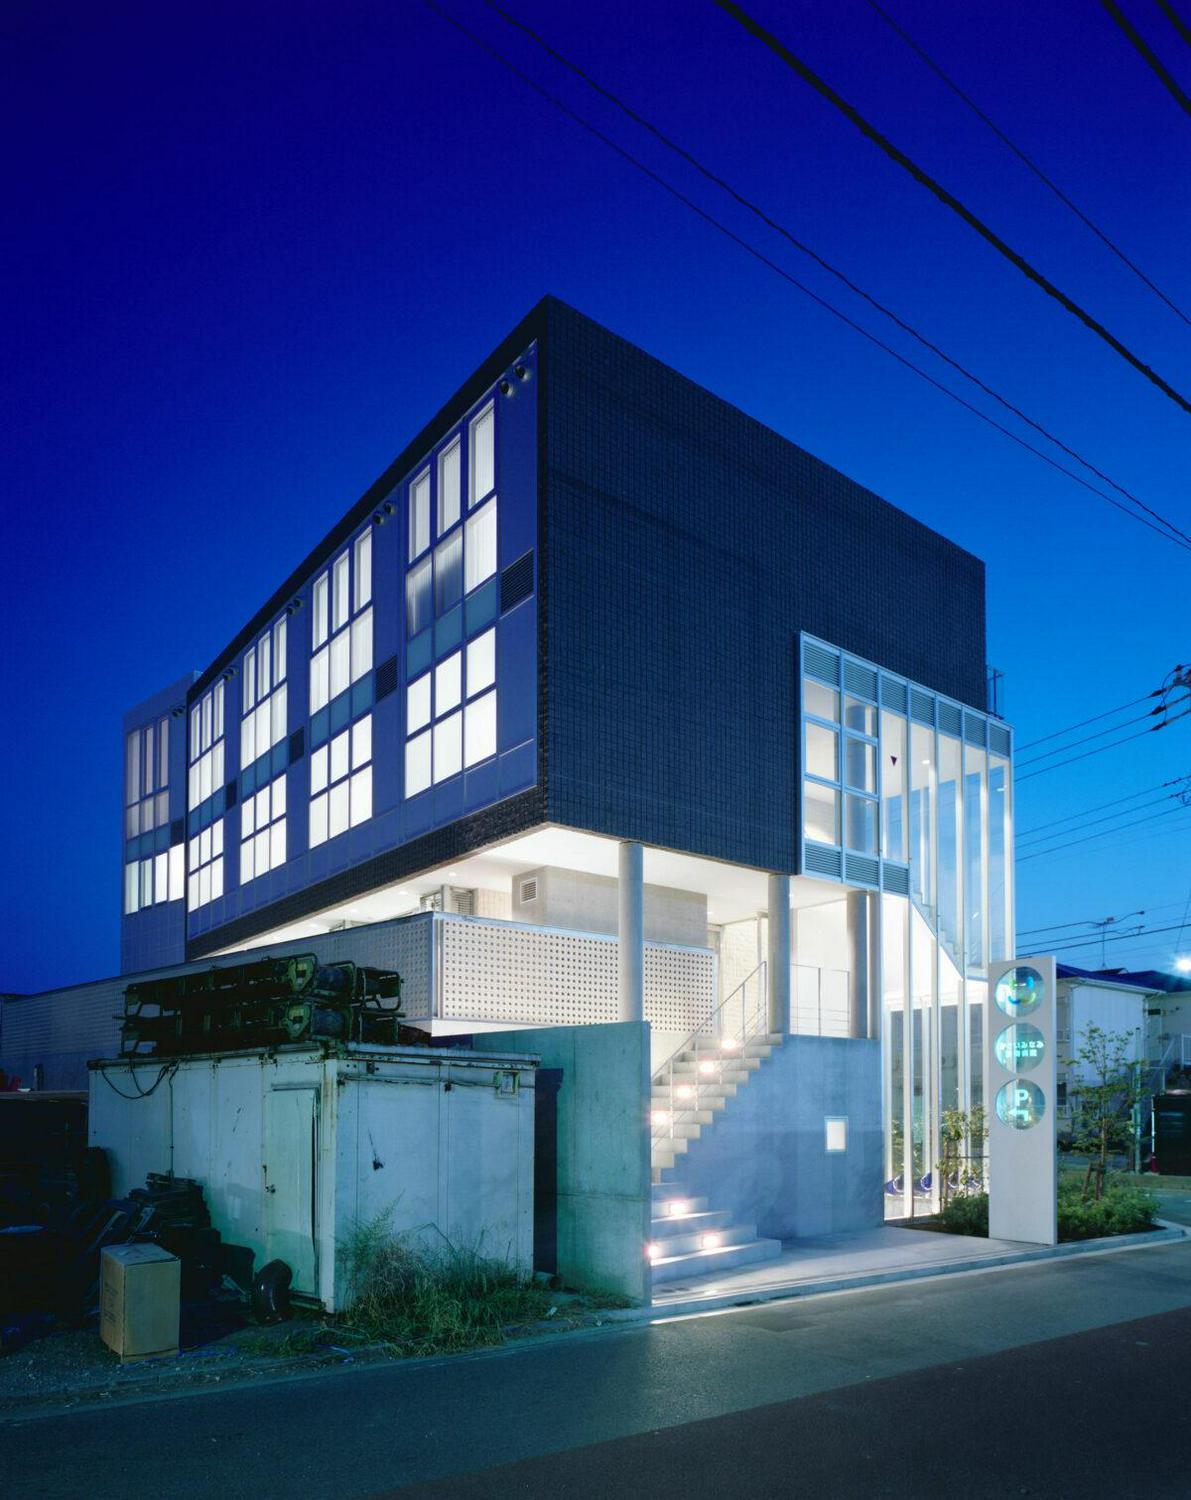 Image of "レヴァンテ｜LEVANTE", the work by architect : Yasumi TAKETOMI (image number 18)